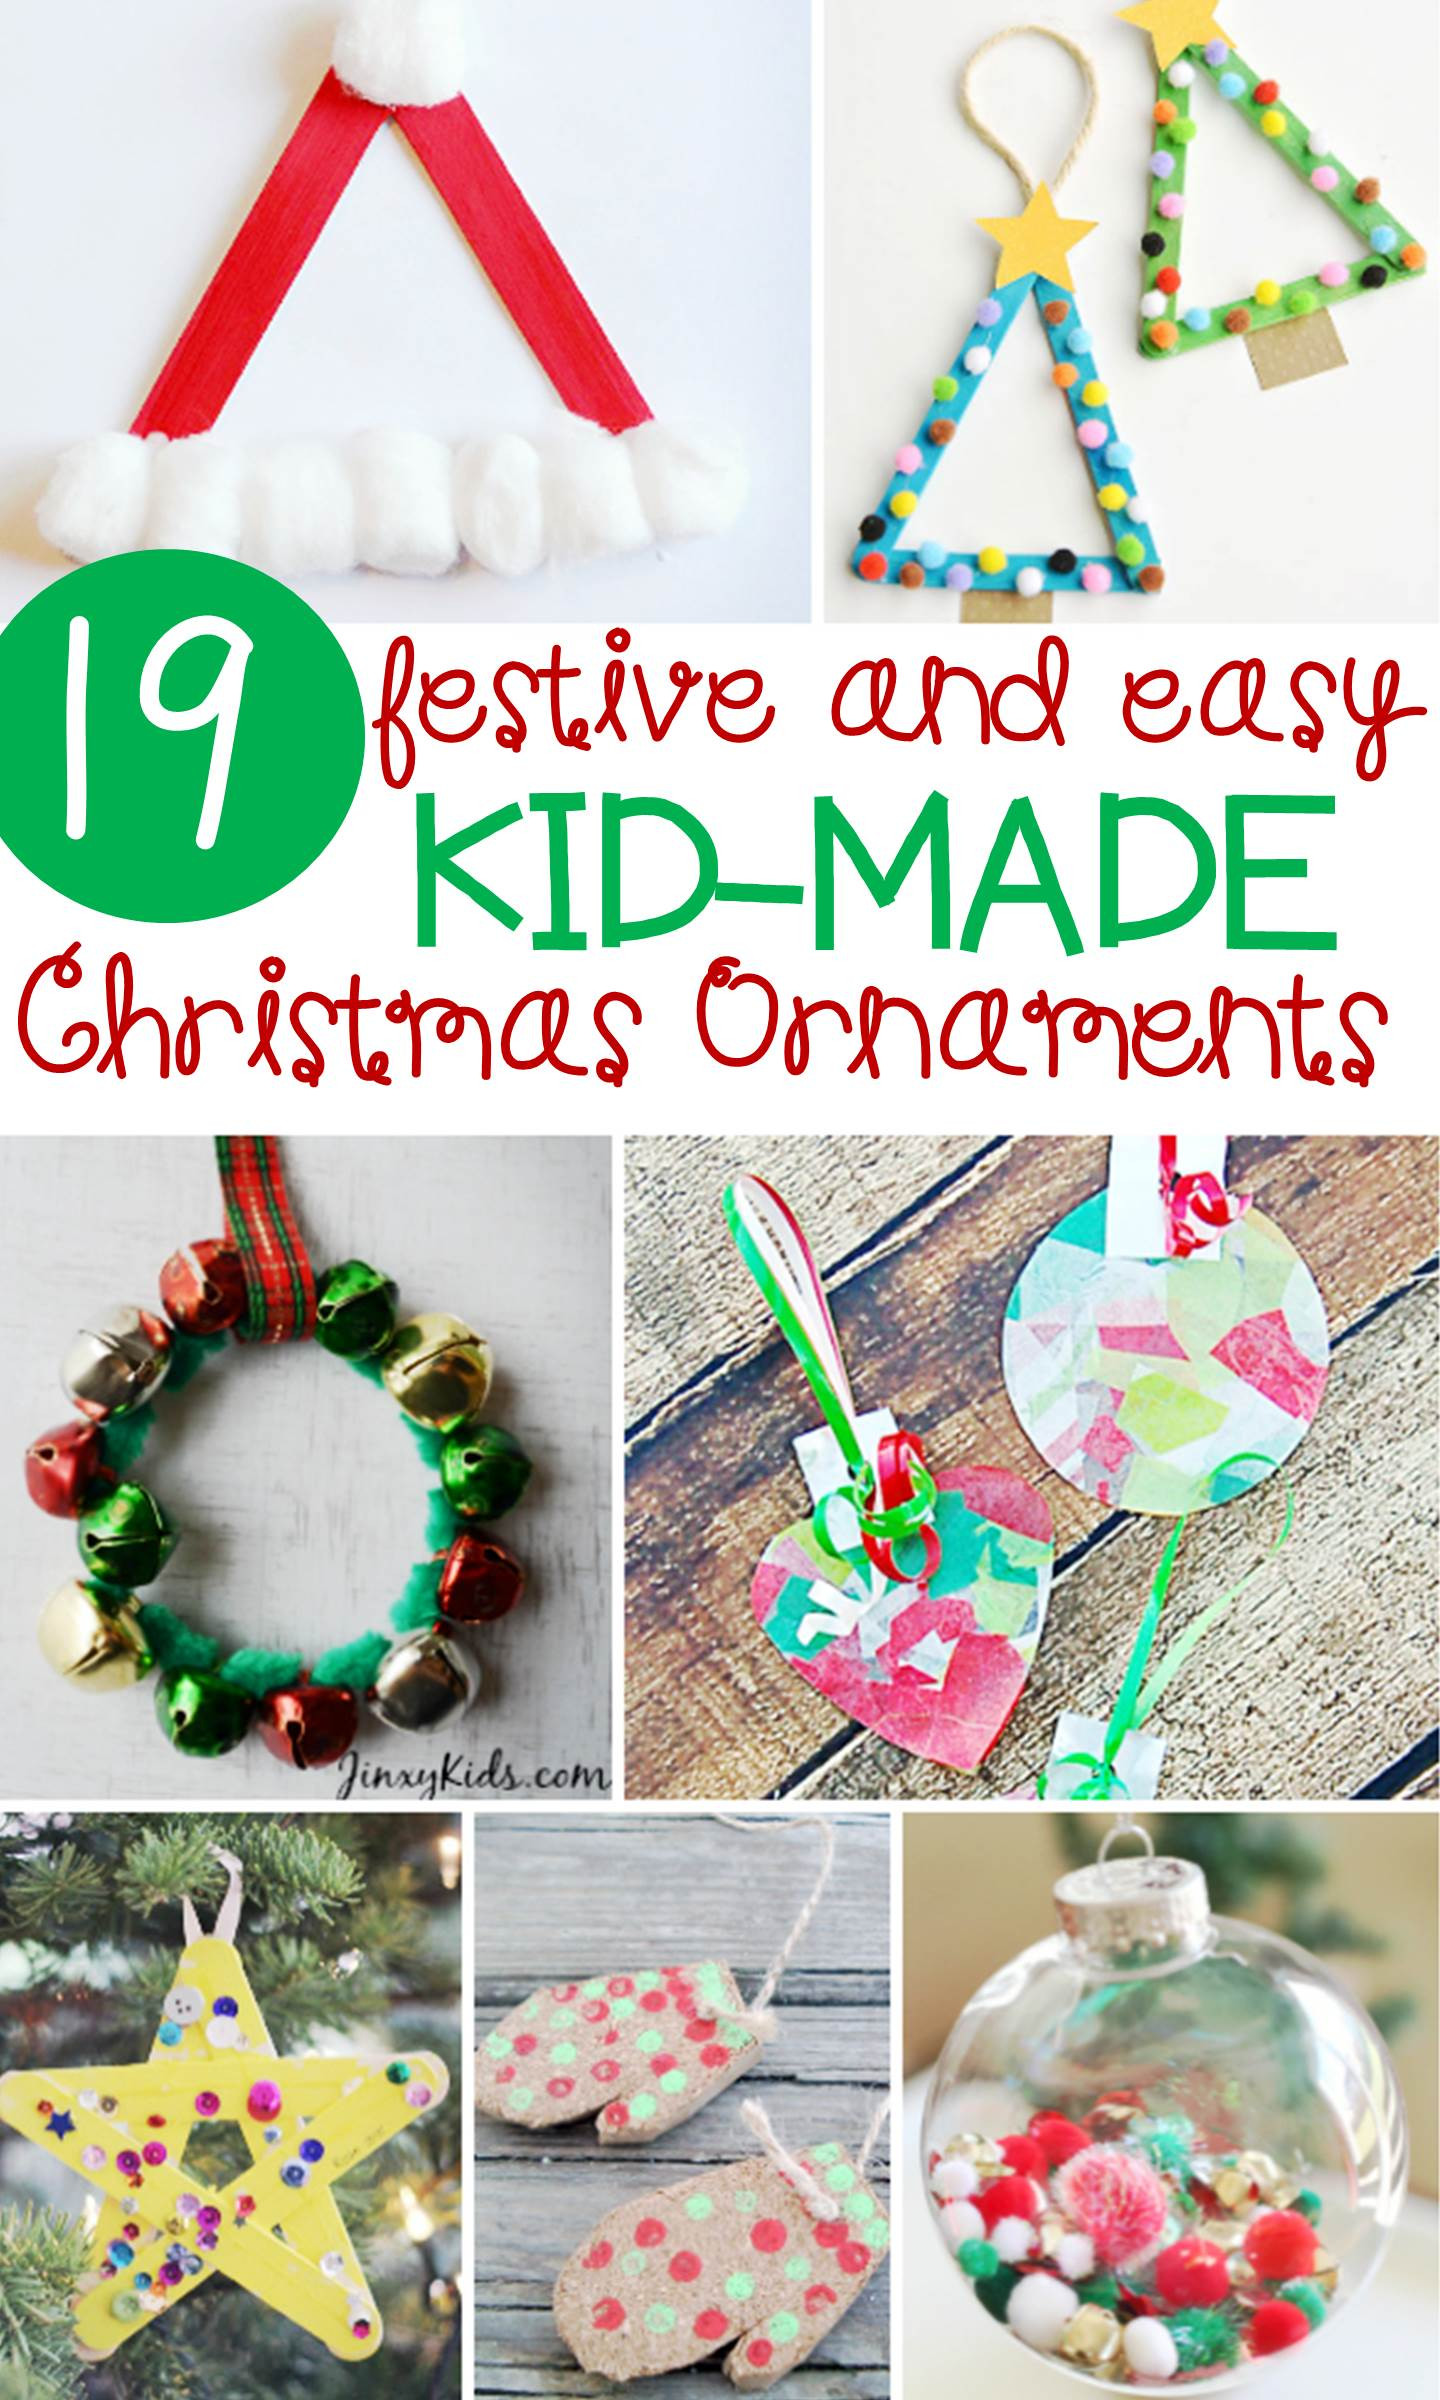 Christmas Projects For Preschoolers
 Festive and Simple Kids Christmas Ornaments The